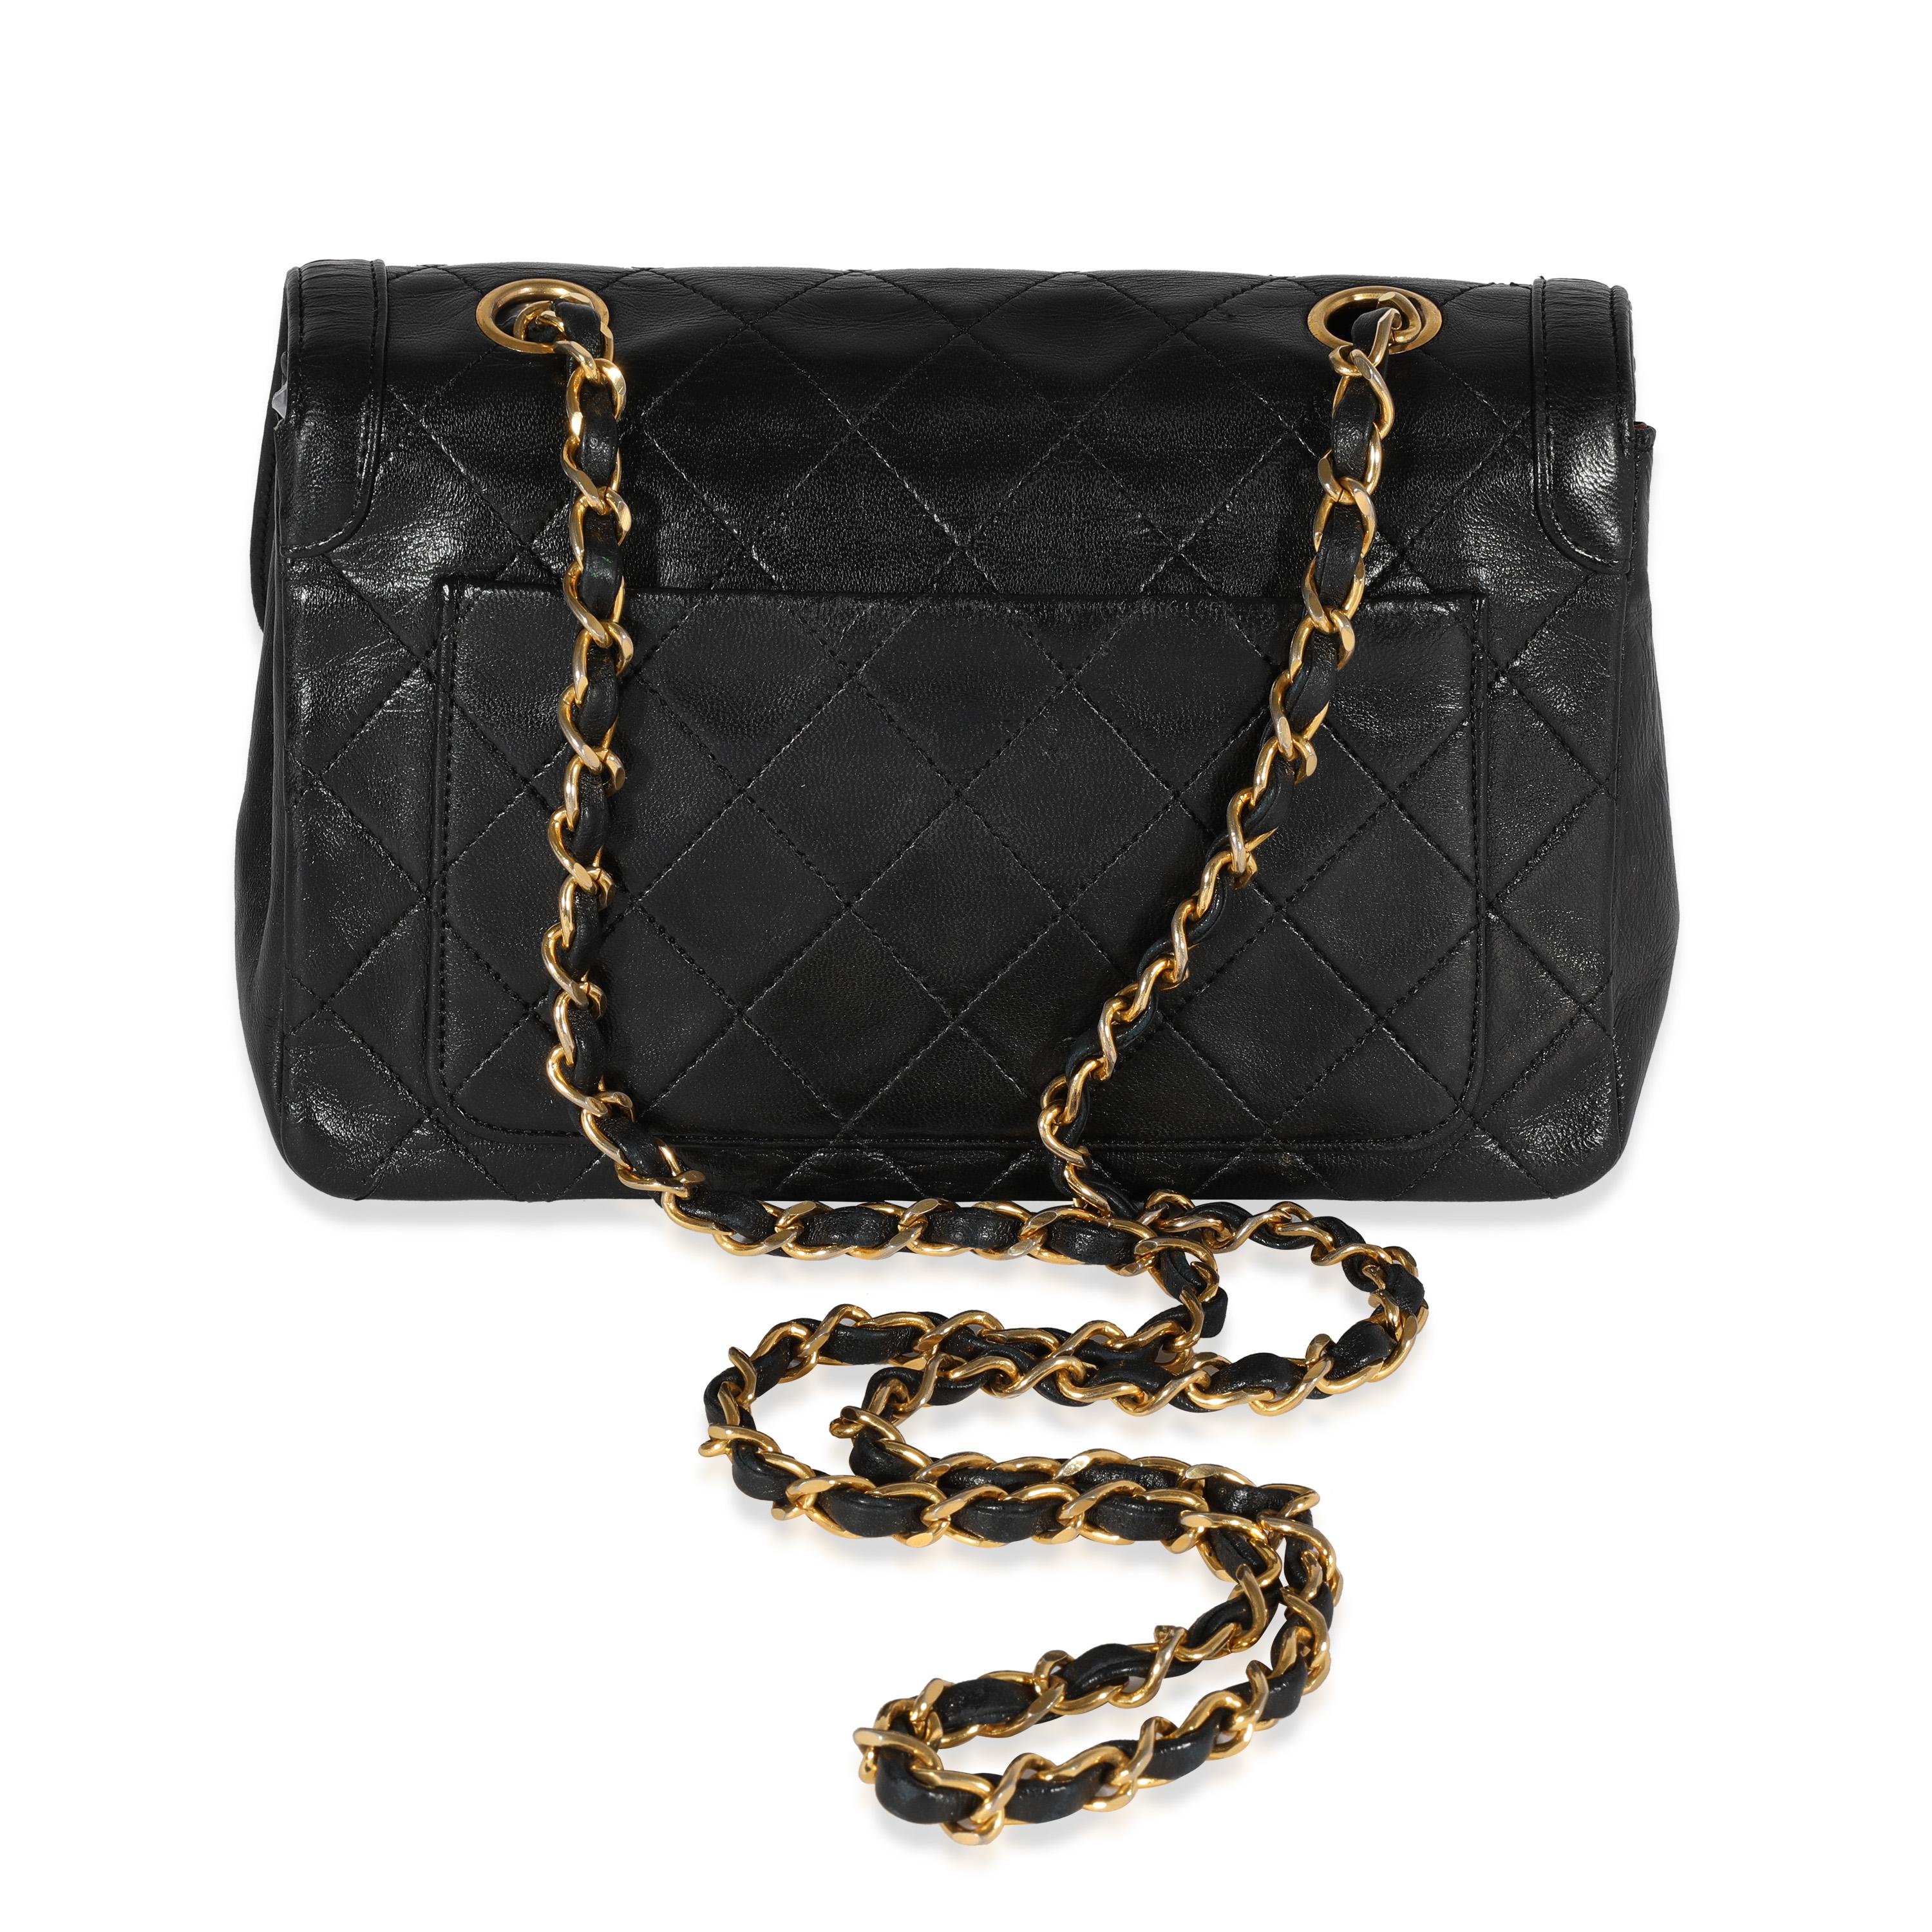 Listing Title: Chanel Vintage Black Quilted Lambskin Single Flap Bag
SKU: 121977
Condition: Pre-owned 
Handbag Condition: Good
Condition Comments: Good Condition. Scuffing to corners and exterior. Creasing and indents to leather. Scratching and